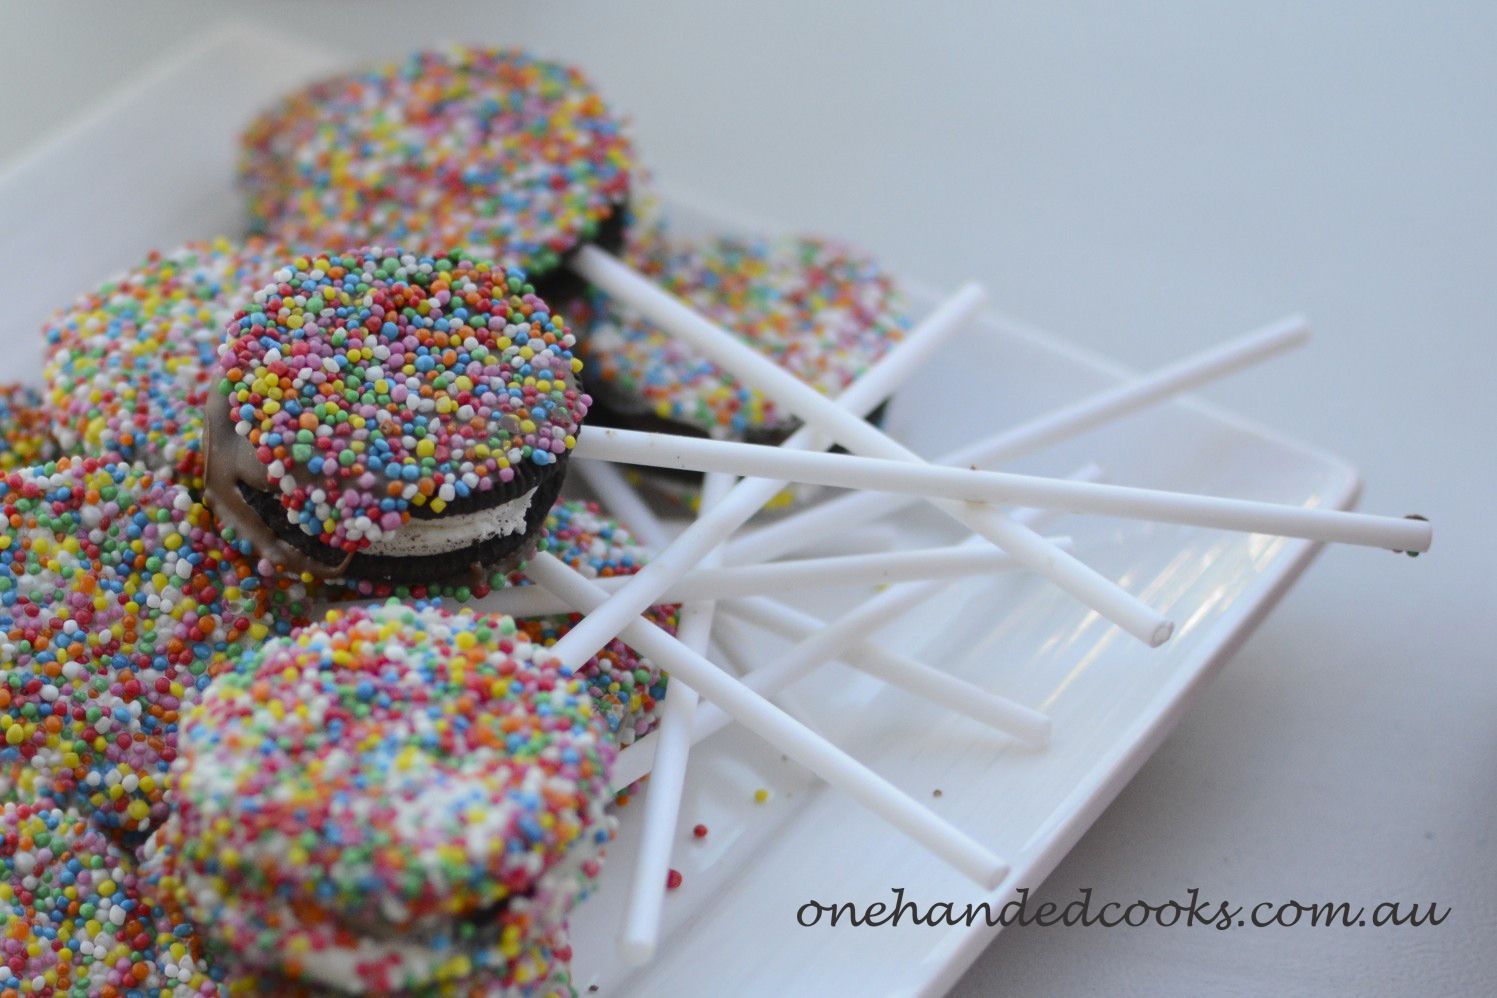 kids party food: oreo pops #oreopops #onehandedcooks #kidsparty #party